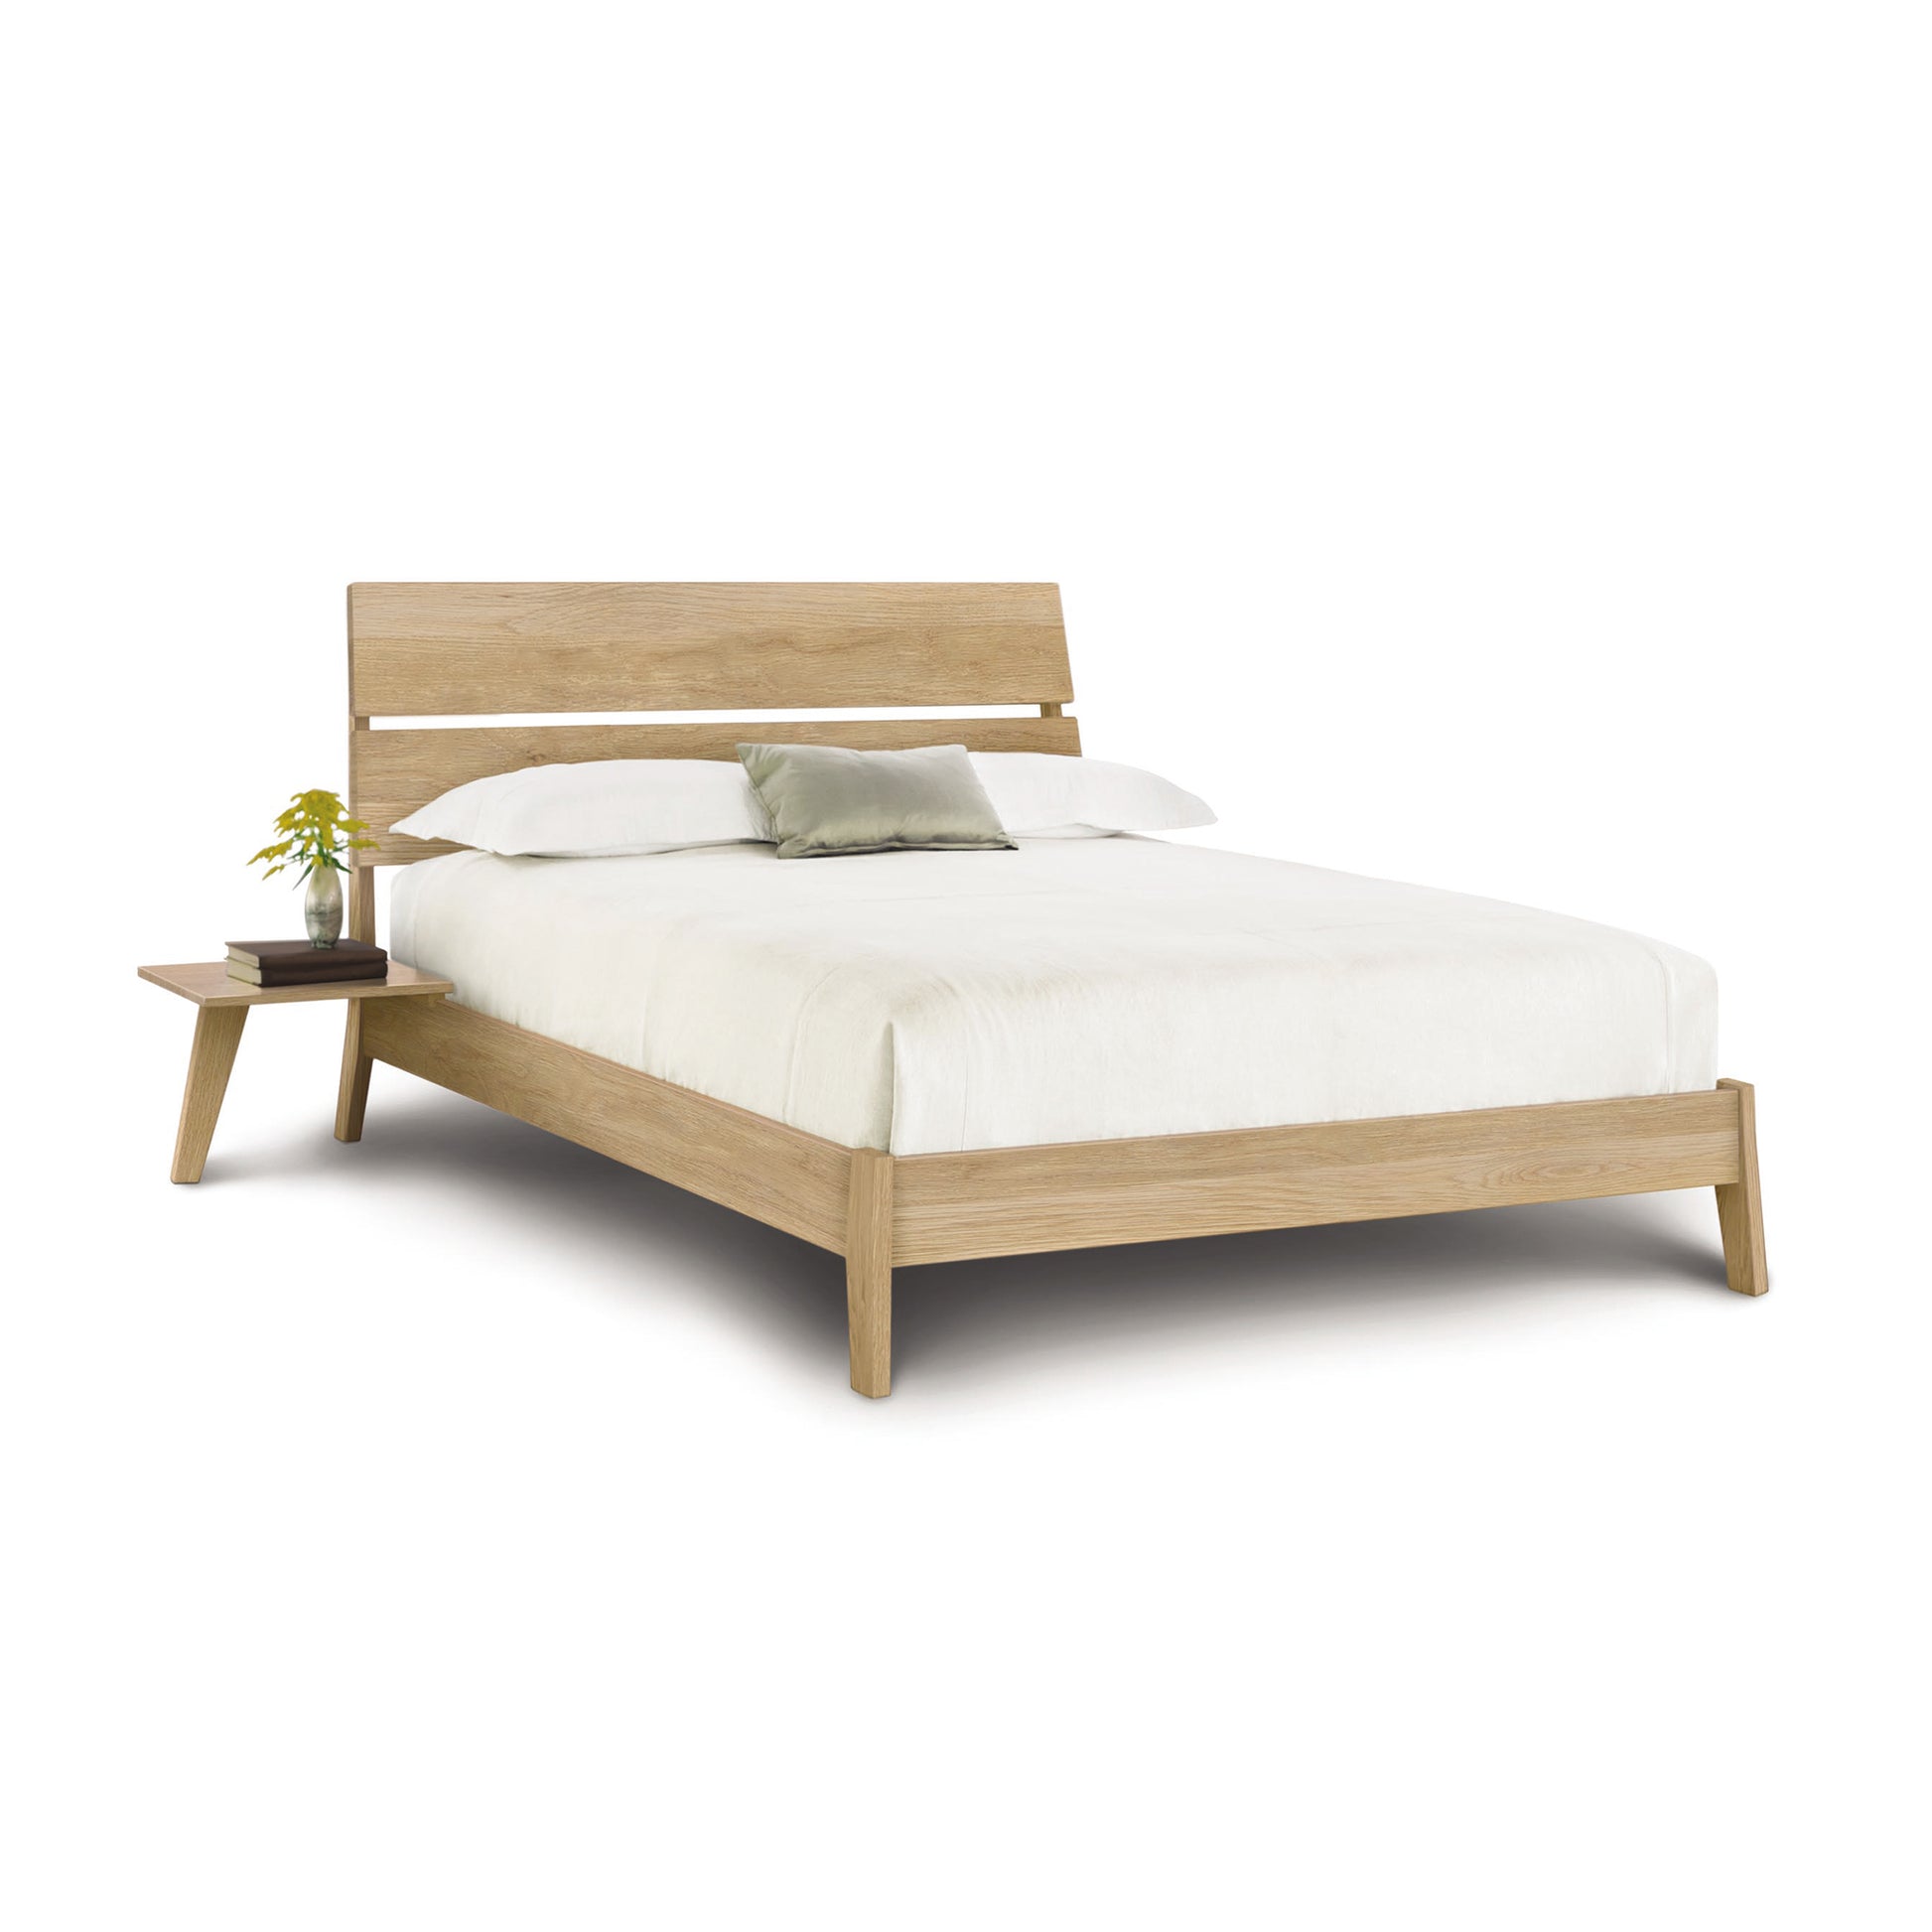 A Linn Oak Platform Bed frame with a headboard, dressed in white bedding, accompanied by a small bedside table with a green plant, isolated against a white background. (Copeland Furniture)